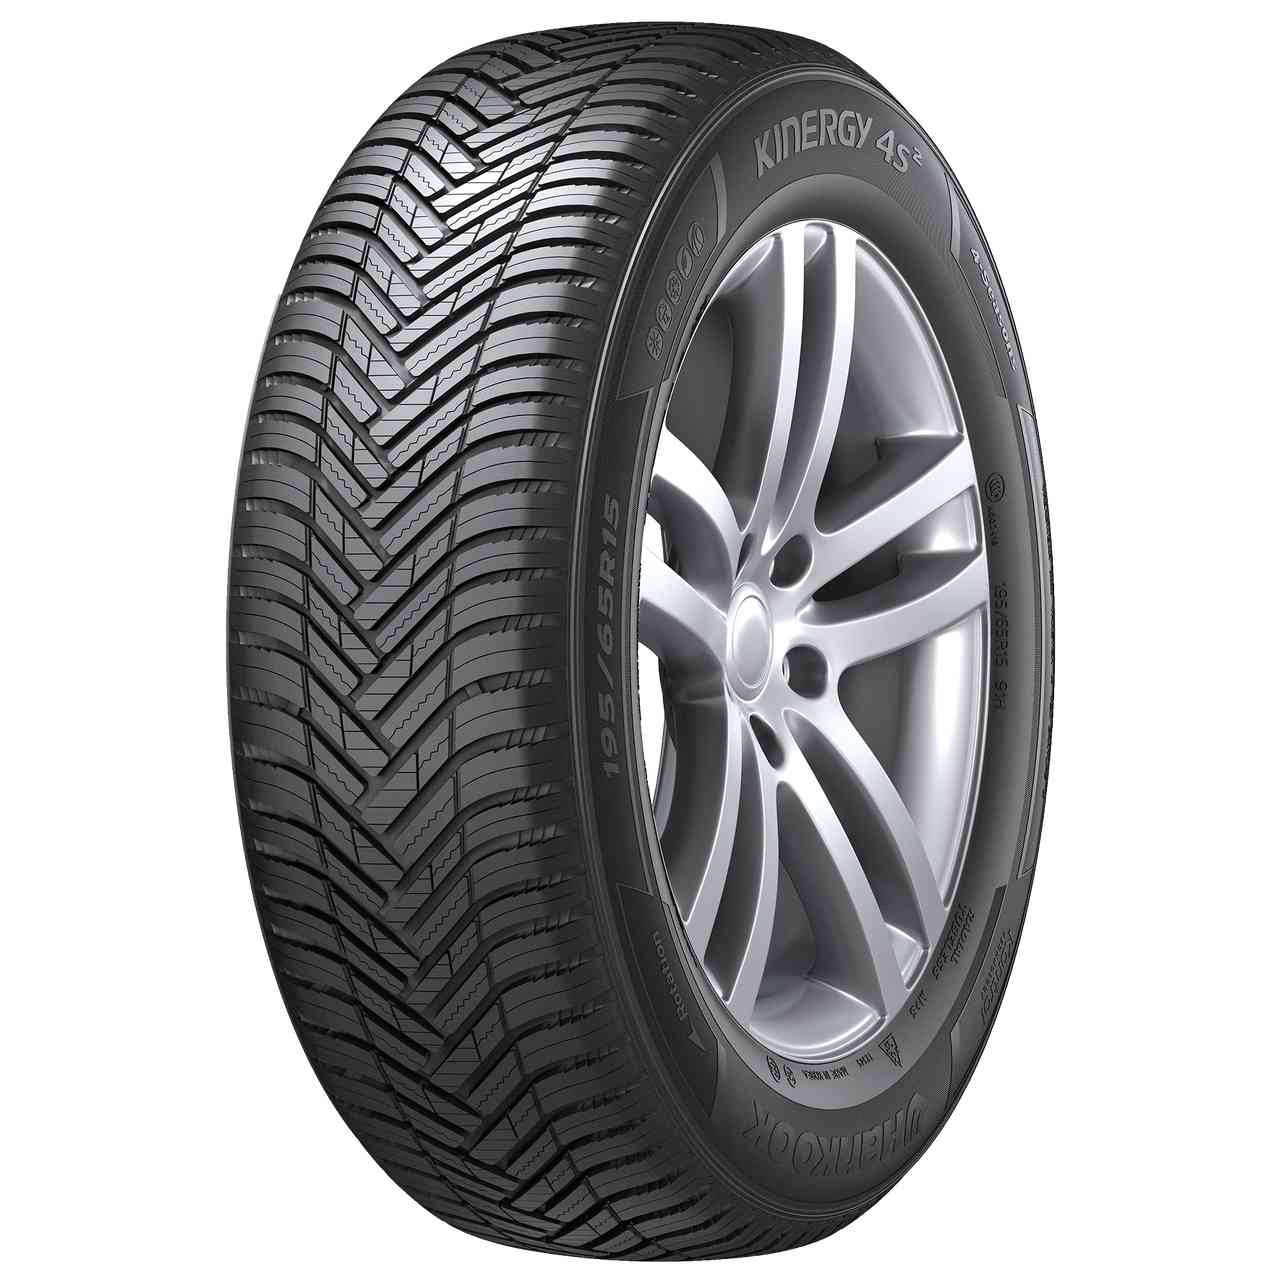 HANKOOK KINERGY 4S 2 (H750) 195/55R16 87V BSW